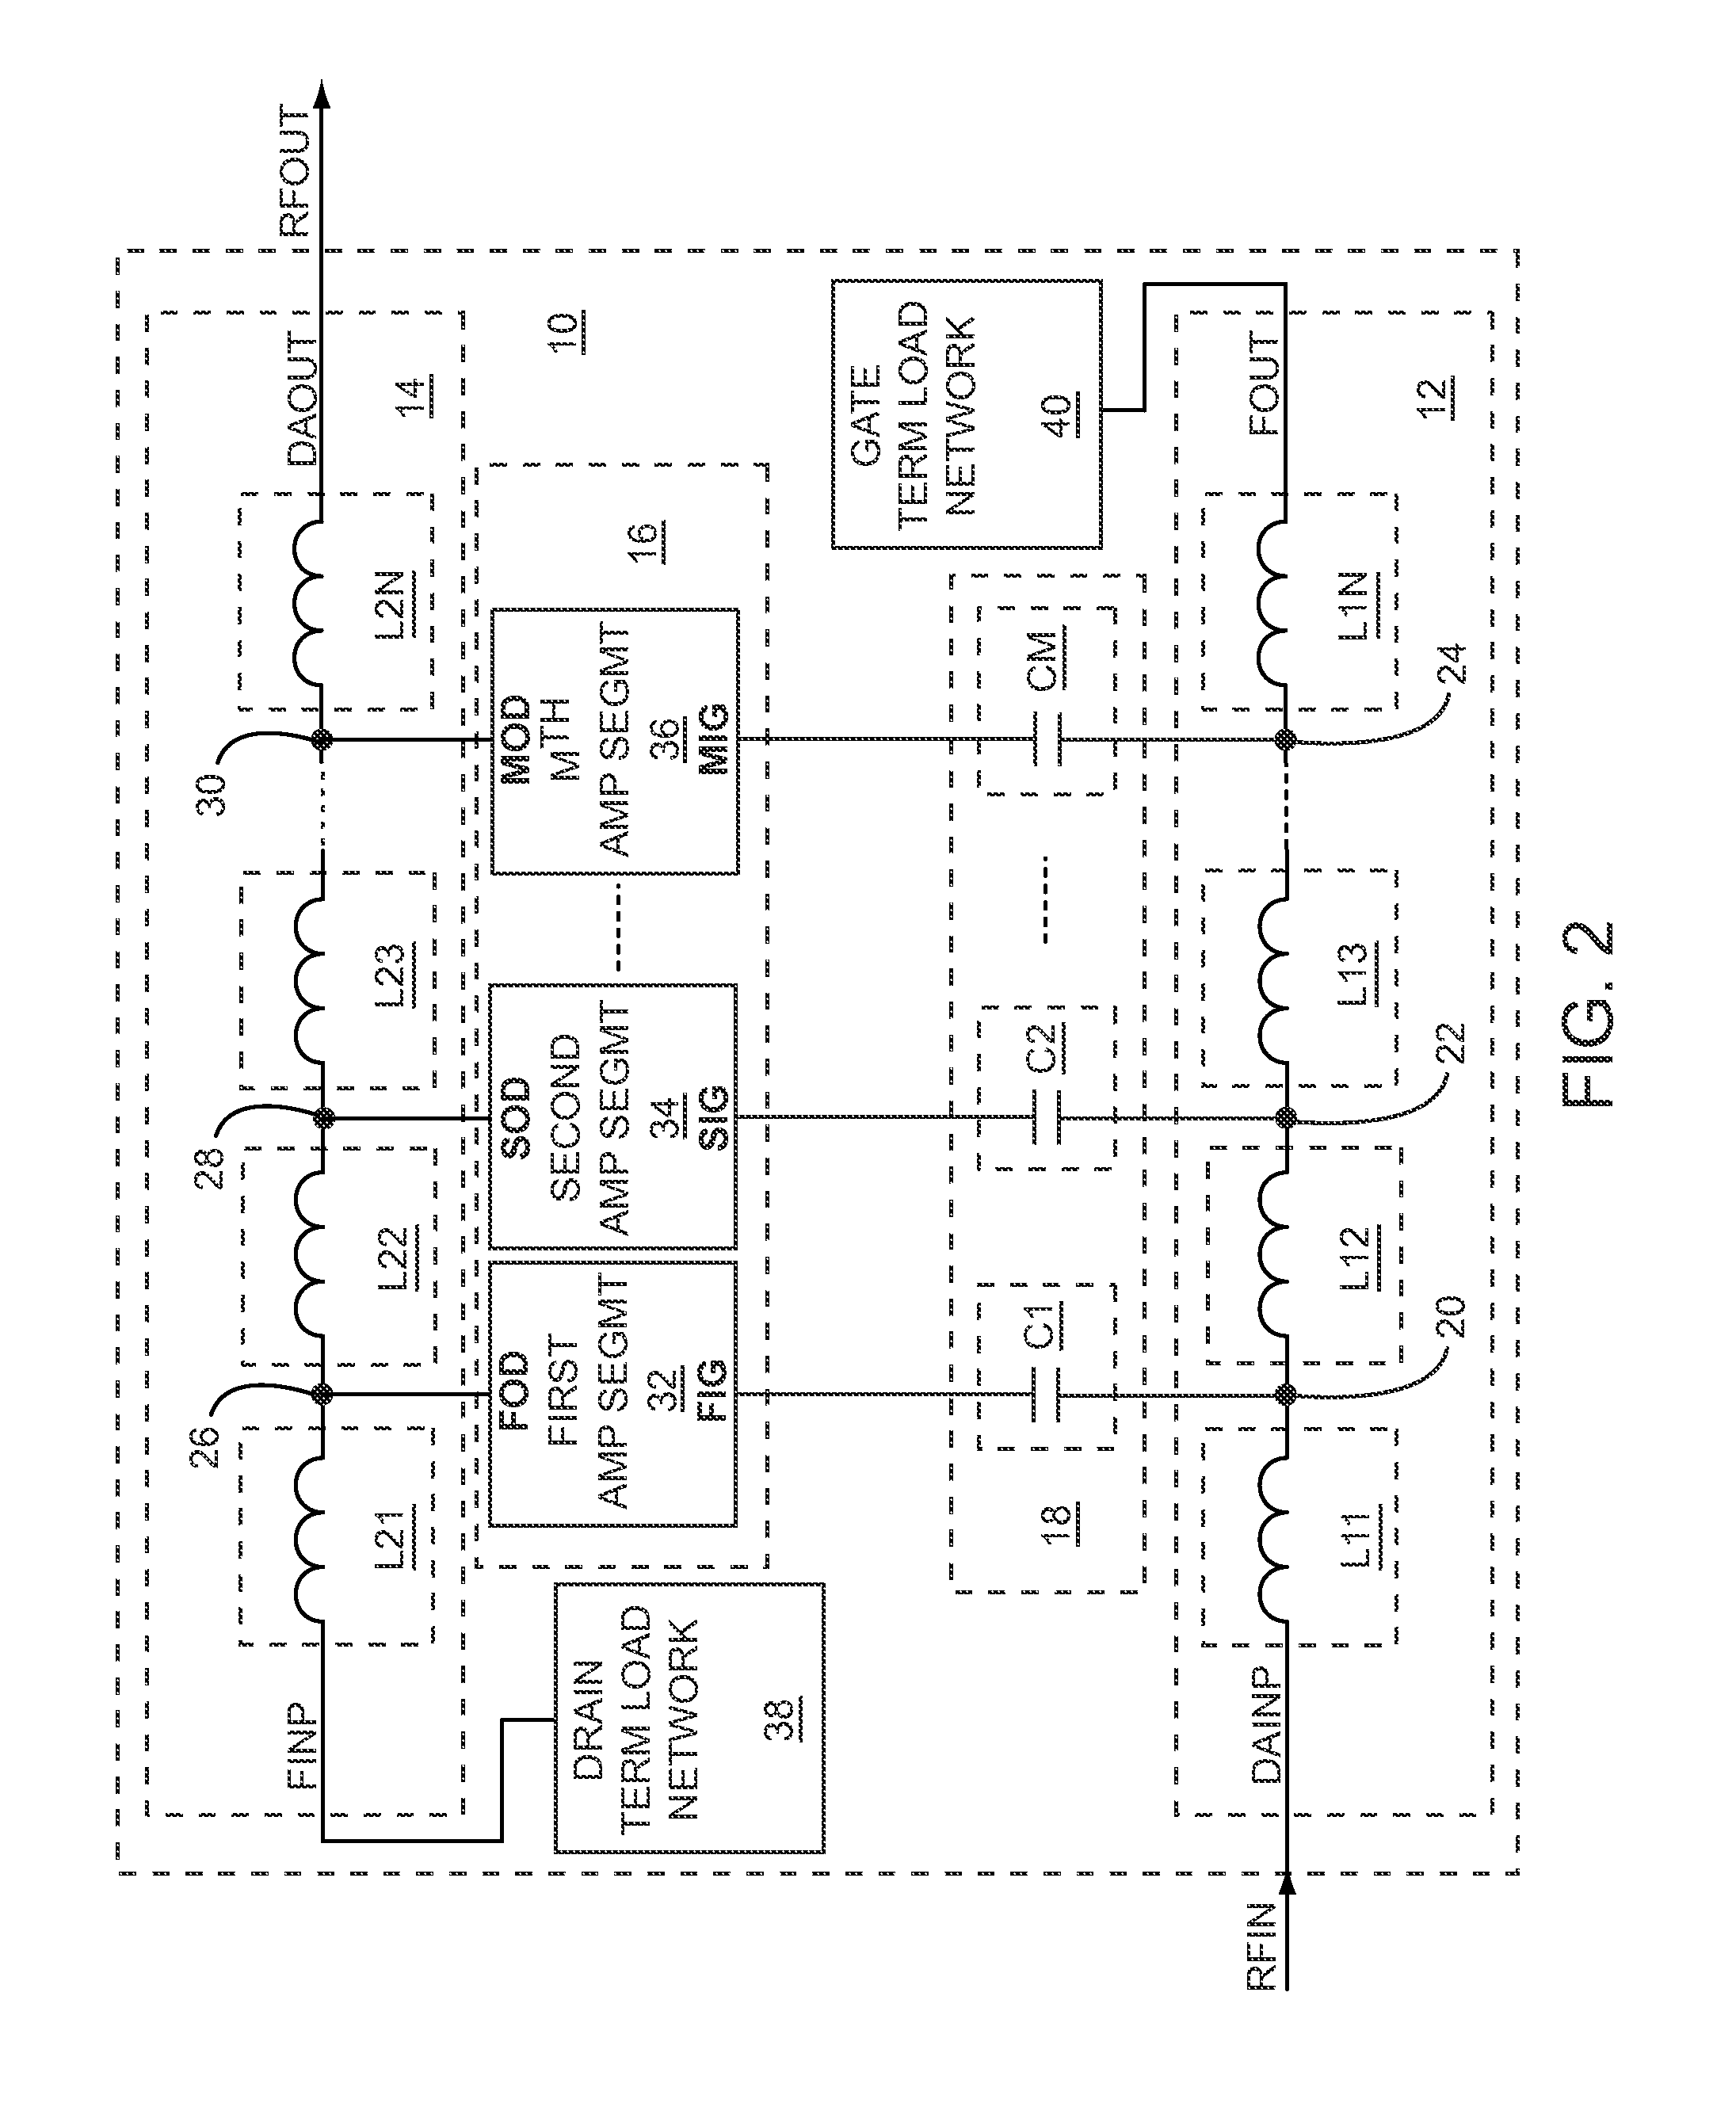 Capacitively-coupled non-uniformly distributed amplifier